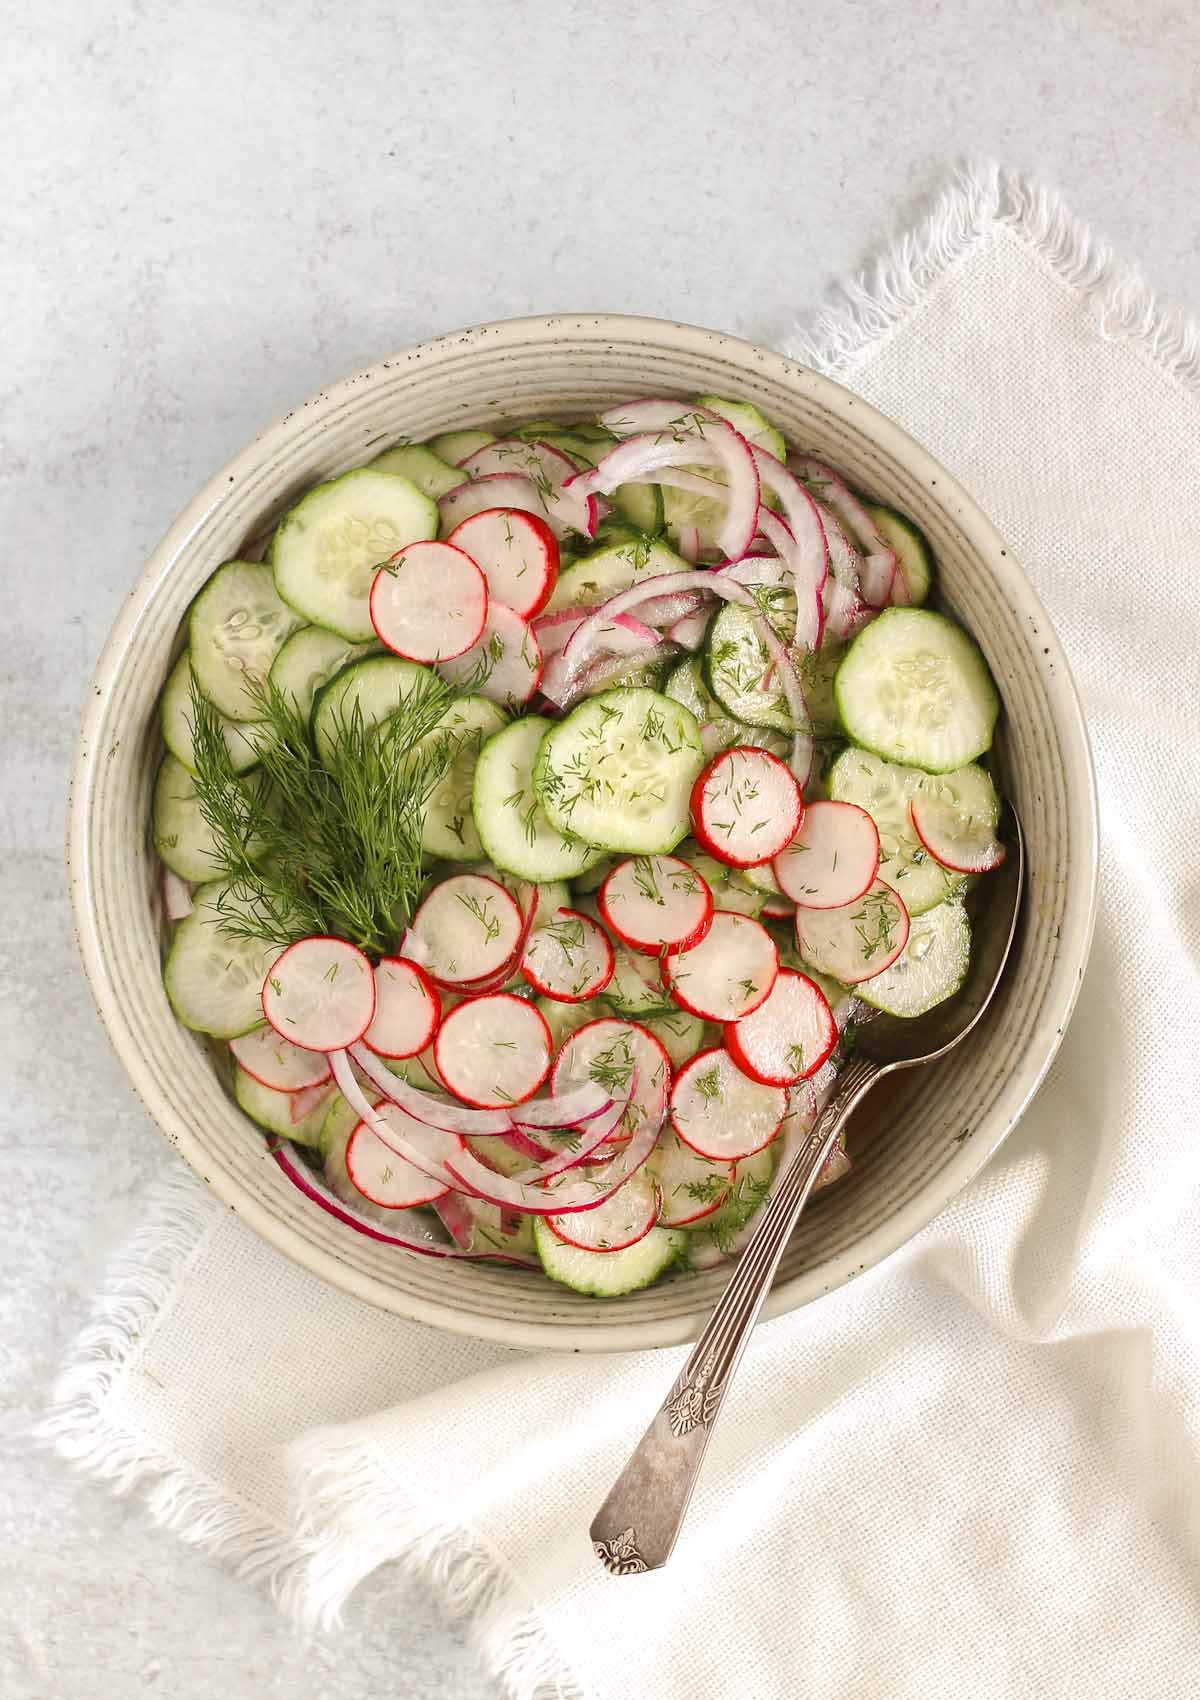 Cucumber radish salad in a serving bowl with red onion and a vintage serving spoon, and sprigs of fresh dill.